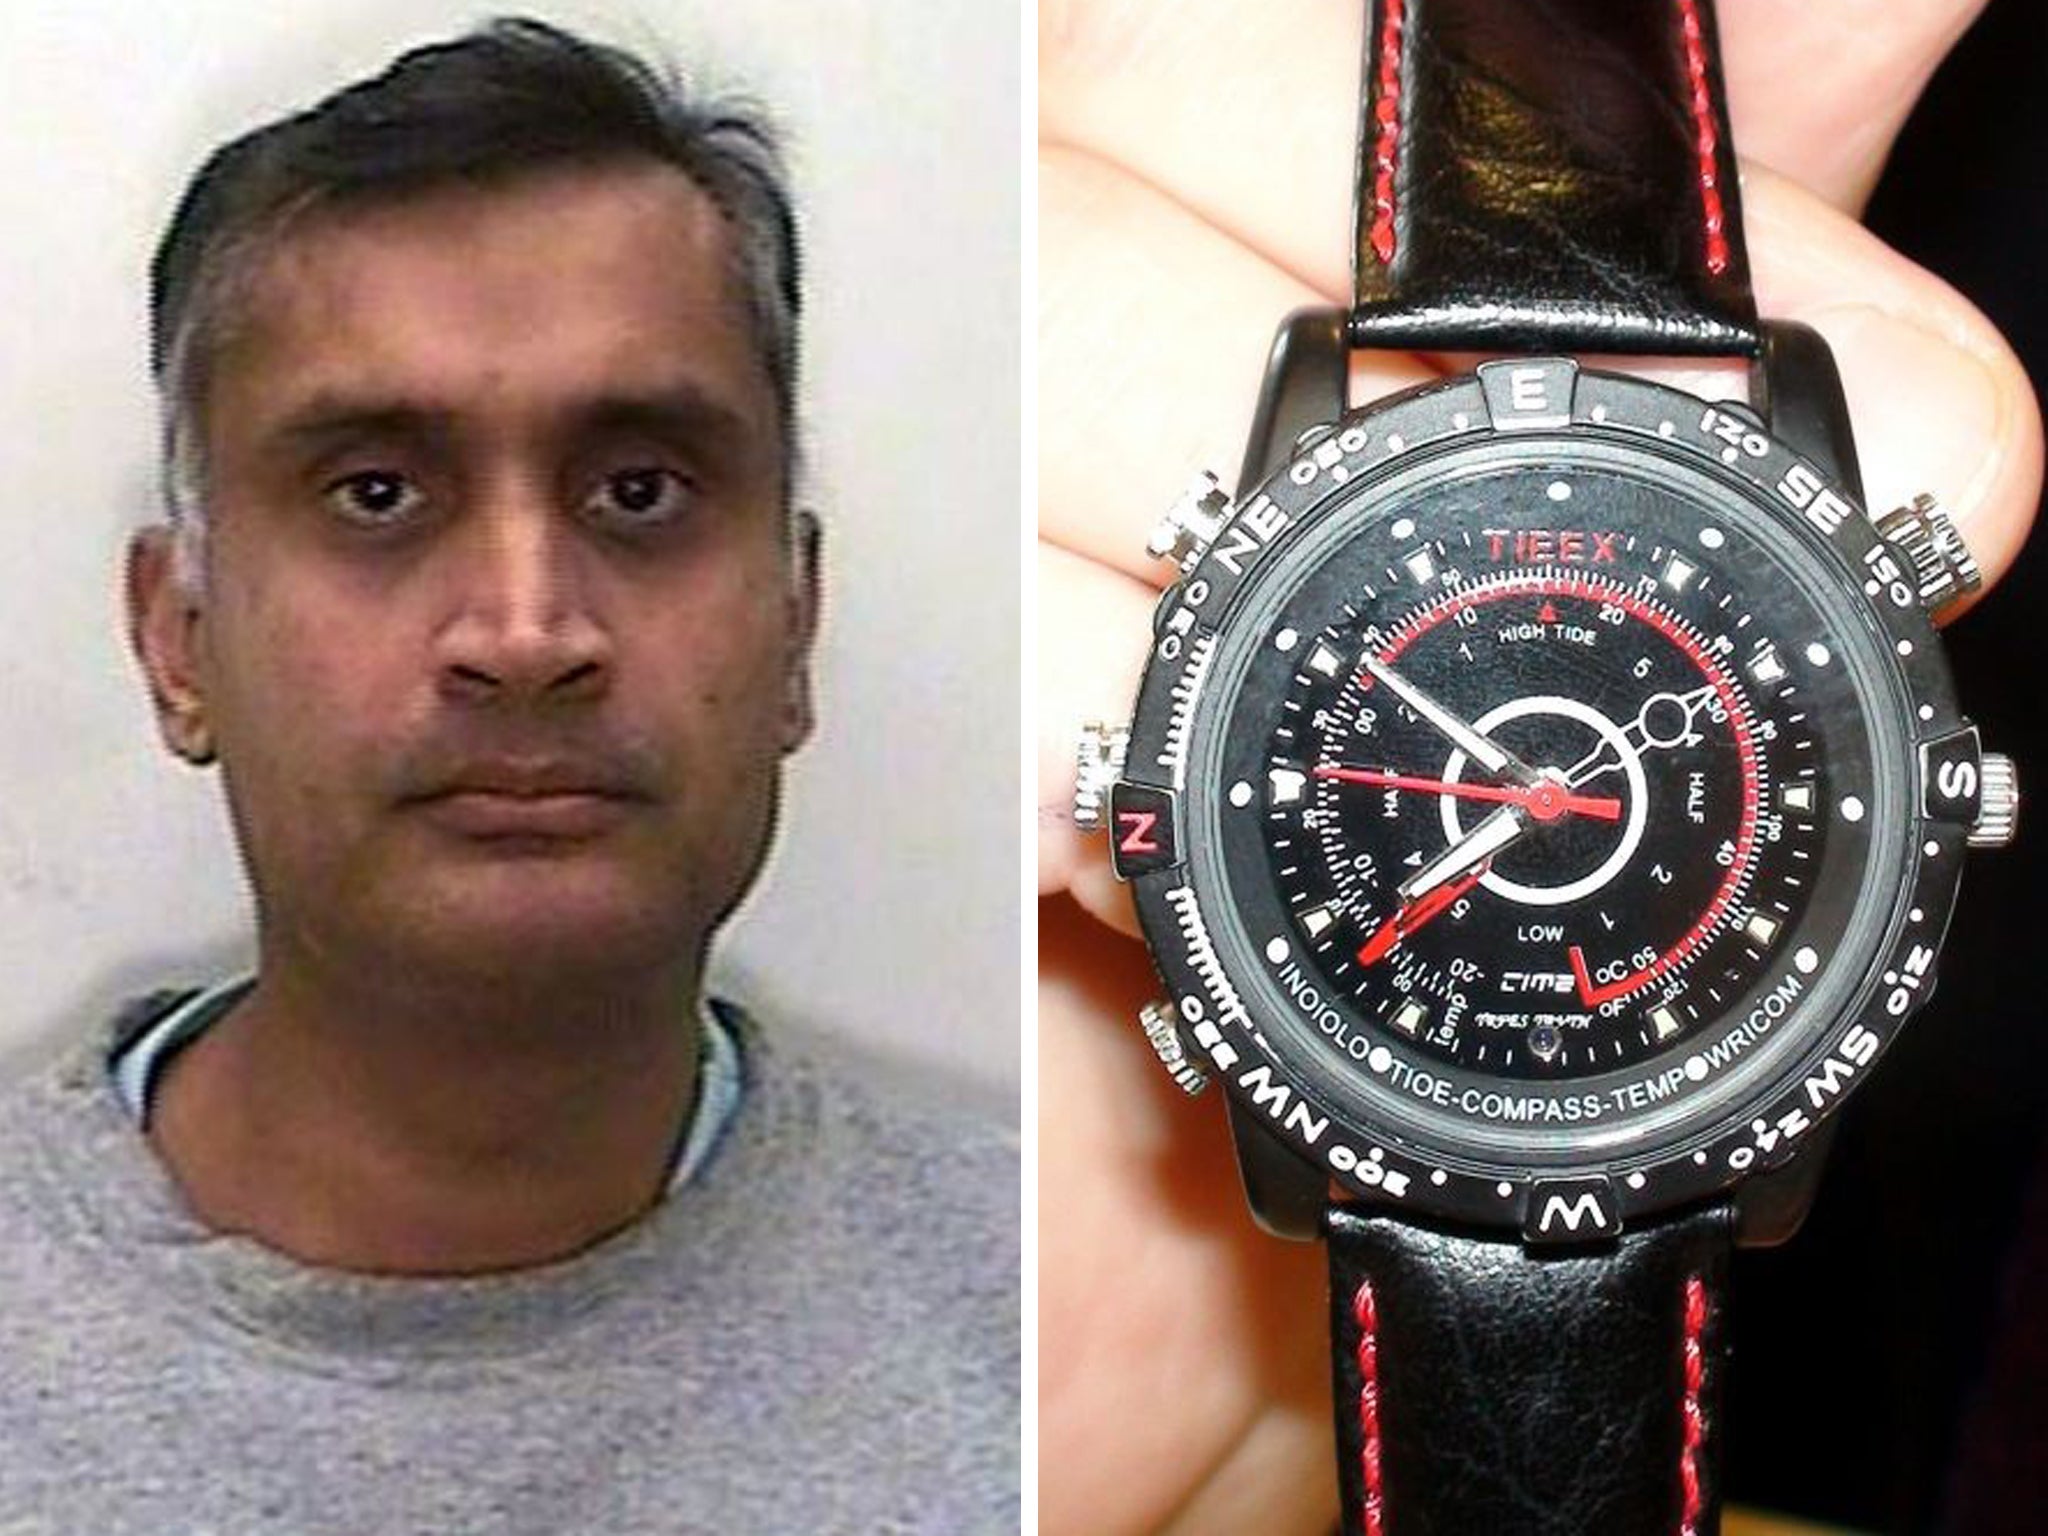 Dr Davinder Jeet Bains used a hidden camera inside a hi-tech watch to film abuse on female patients